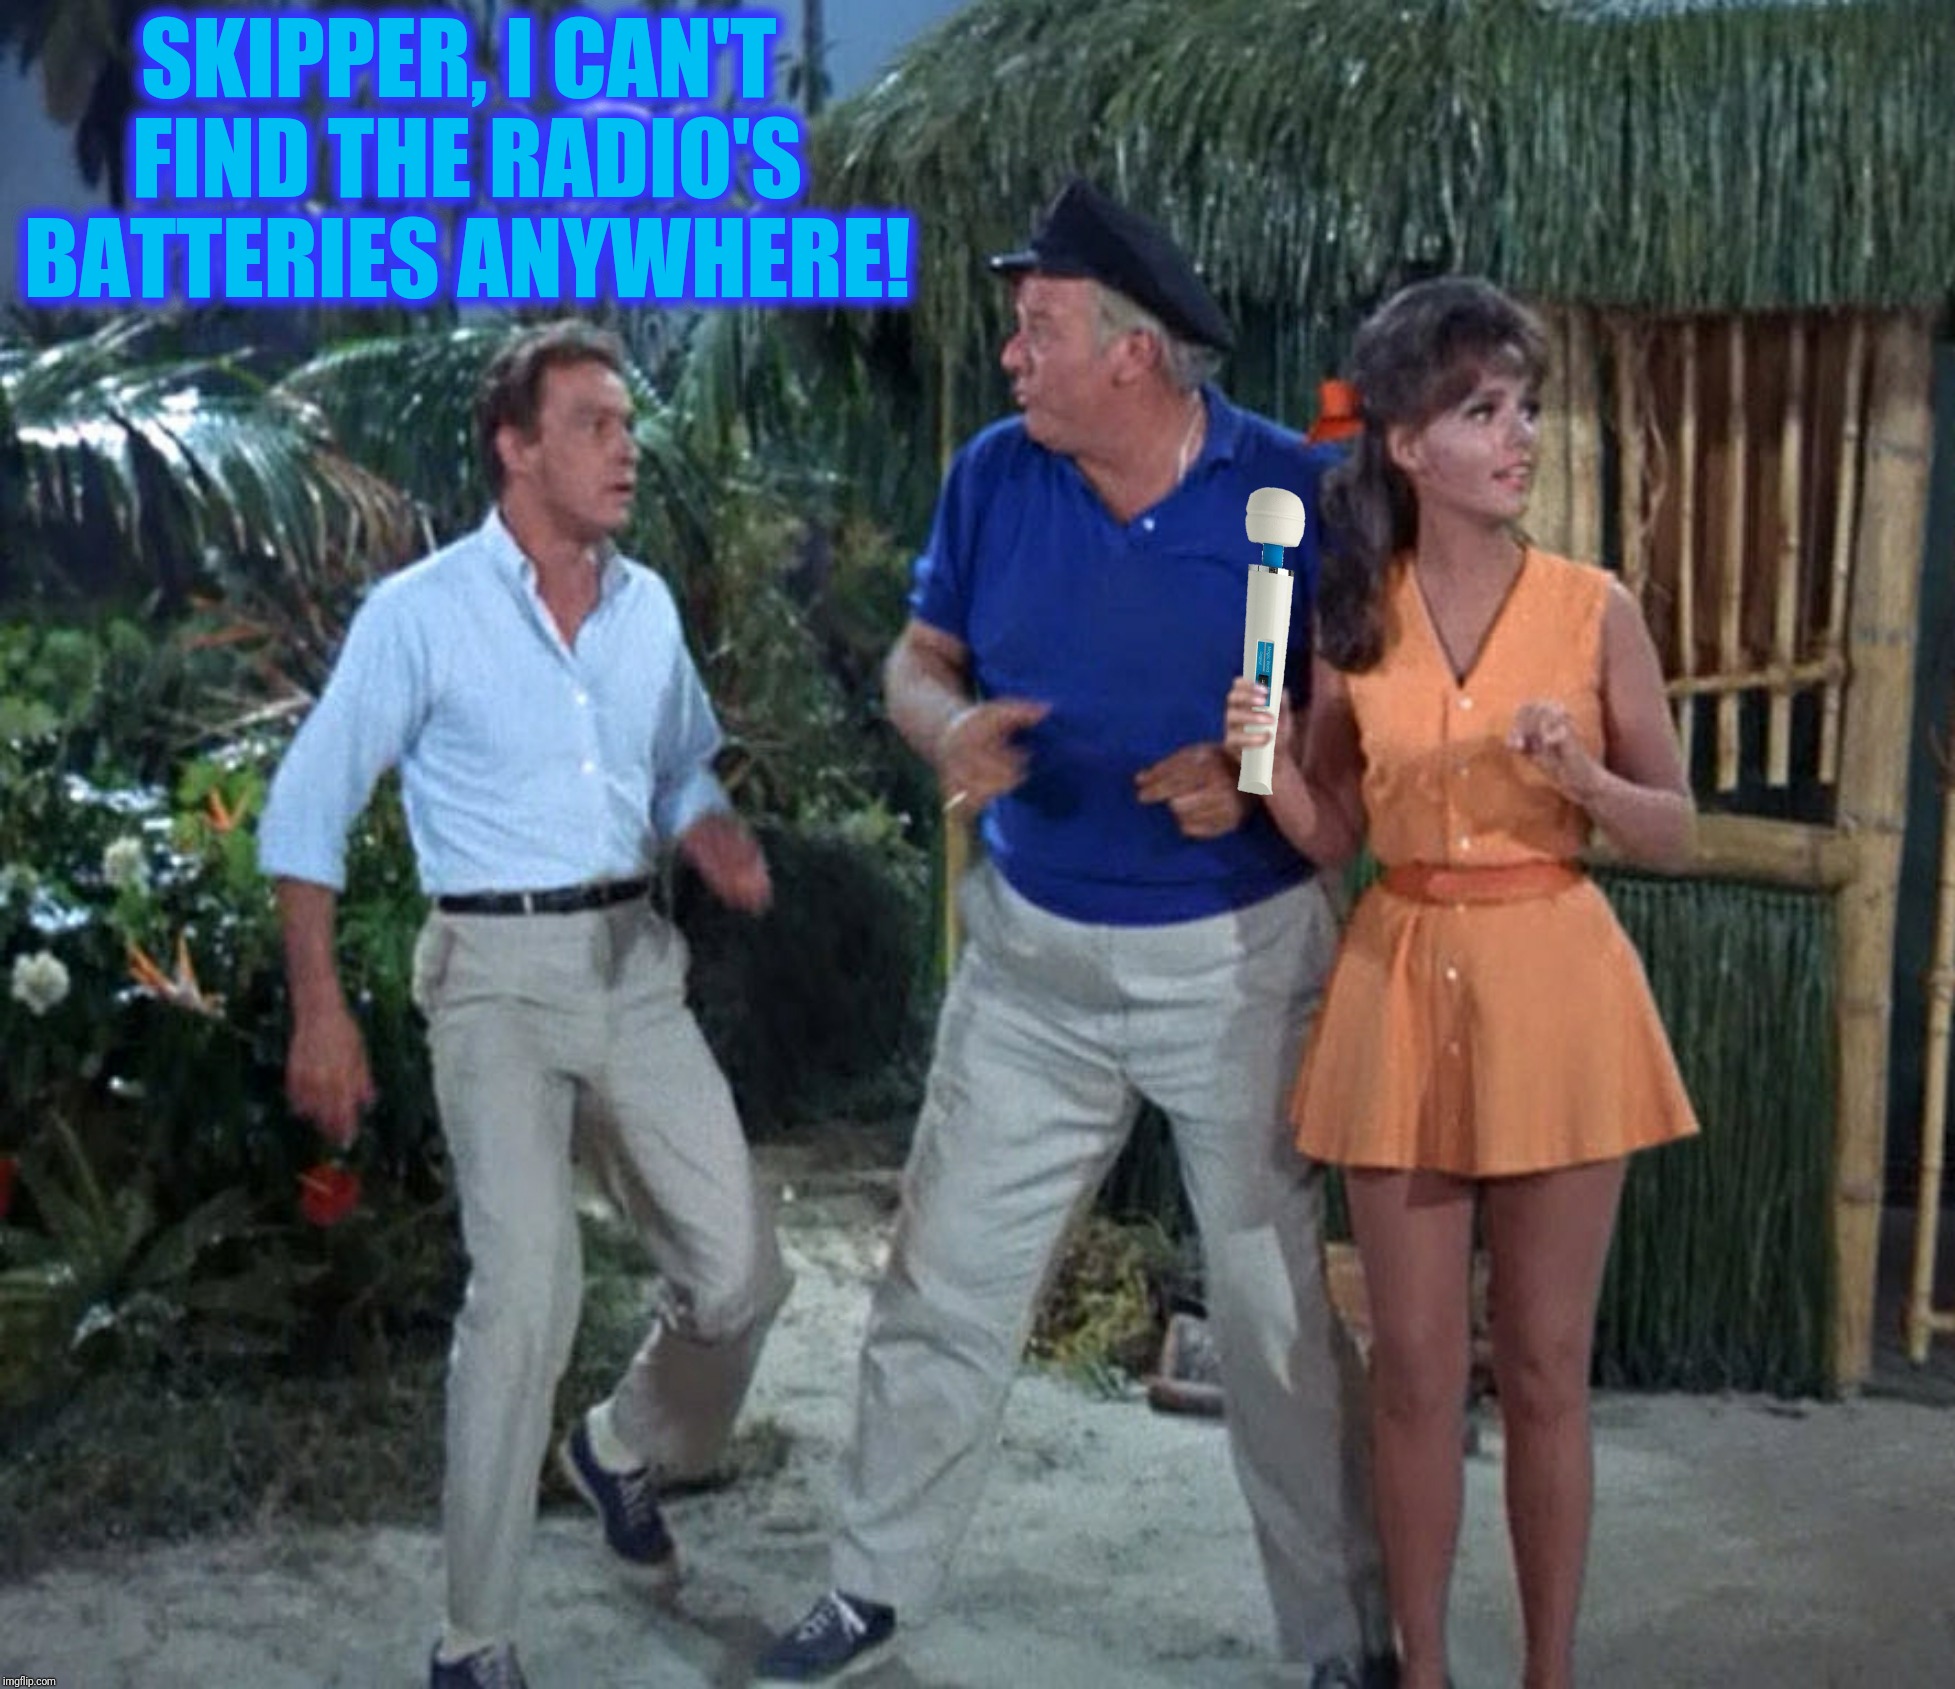 Bad Photoshop Sunday presents:  The real reason they weren't rescued  (Inspired by nsfink) | SKIPPER, I CAN'T FIND THE RADIO'S BATTERIES ANYWHERE! | image tagged in bad photoshop sunday,gilligan's island,professor,skipper,mary ann | made w/ Imgflip meme maker